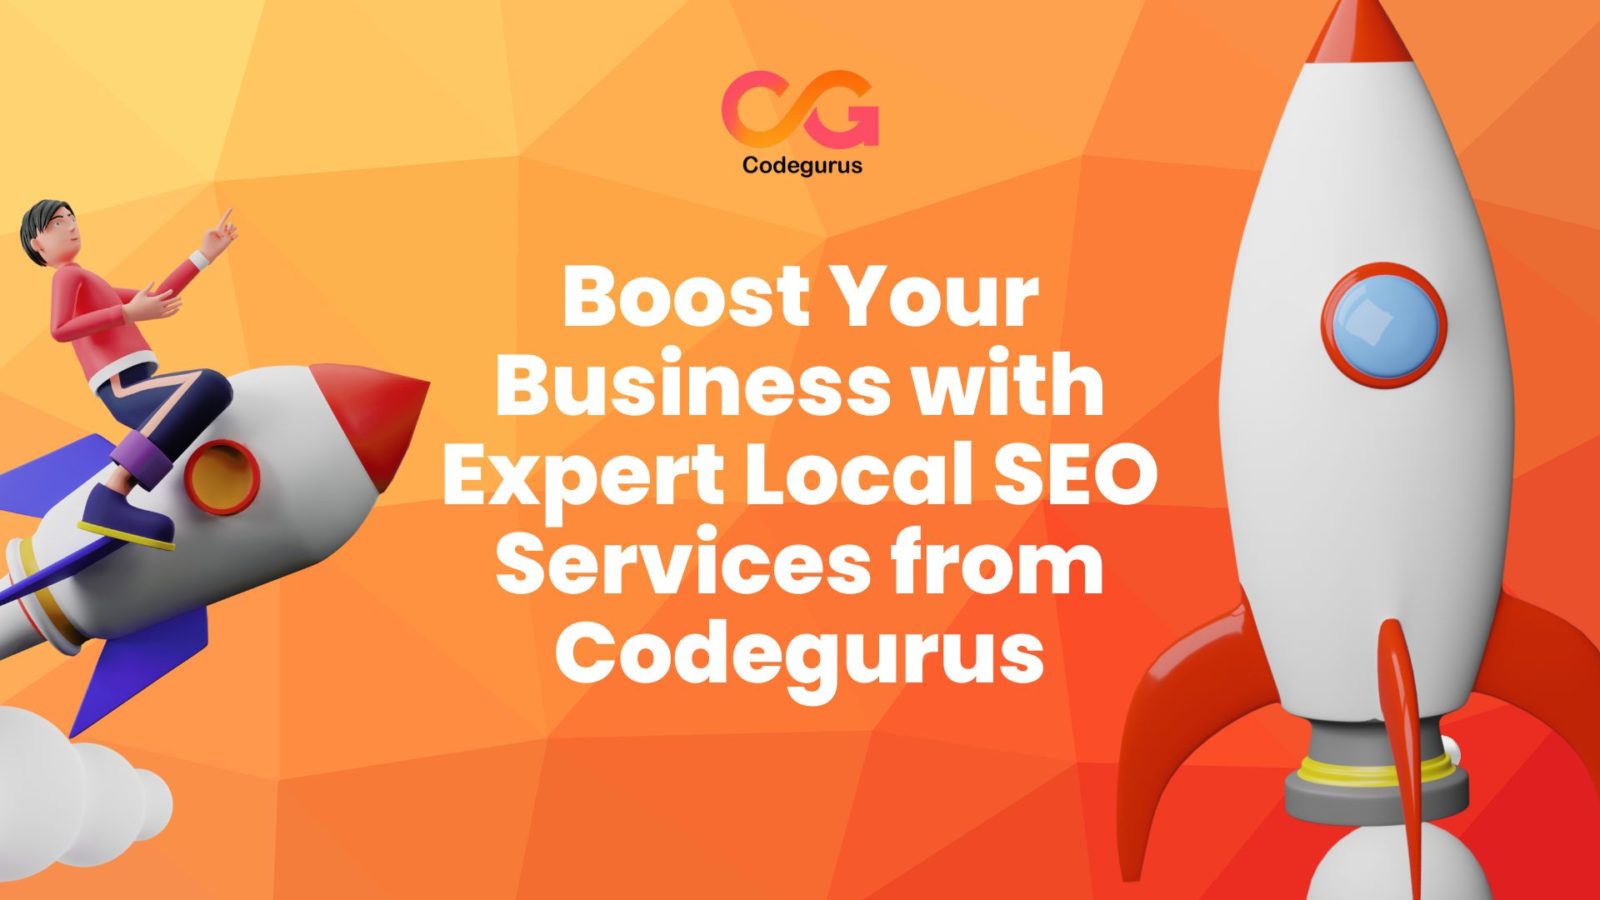 Boost Your Business with Expert Local SEO Services from Codegurus